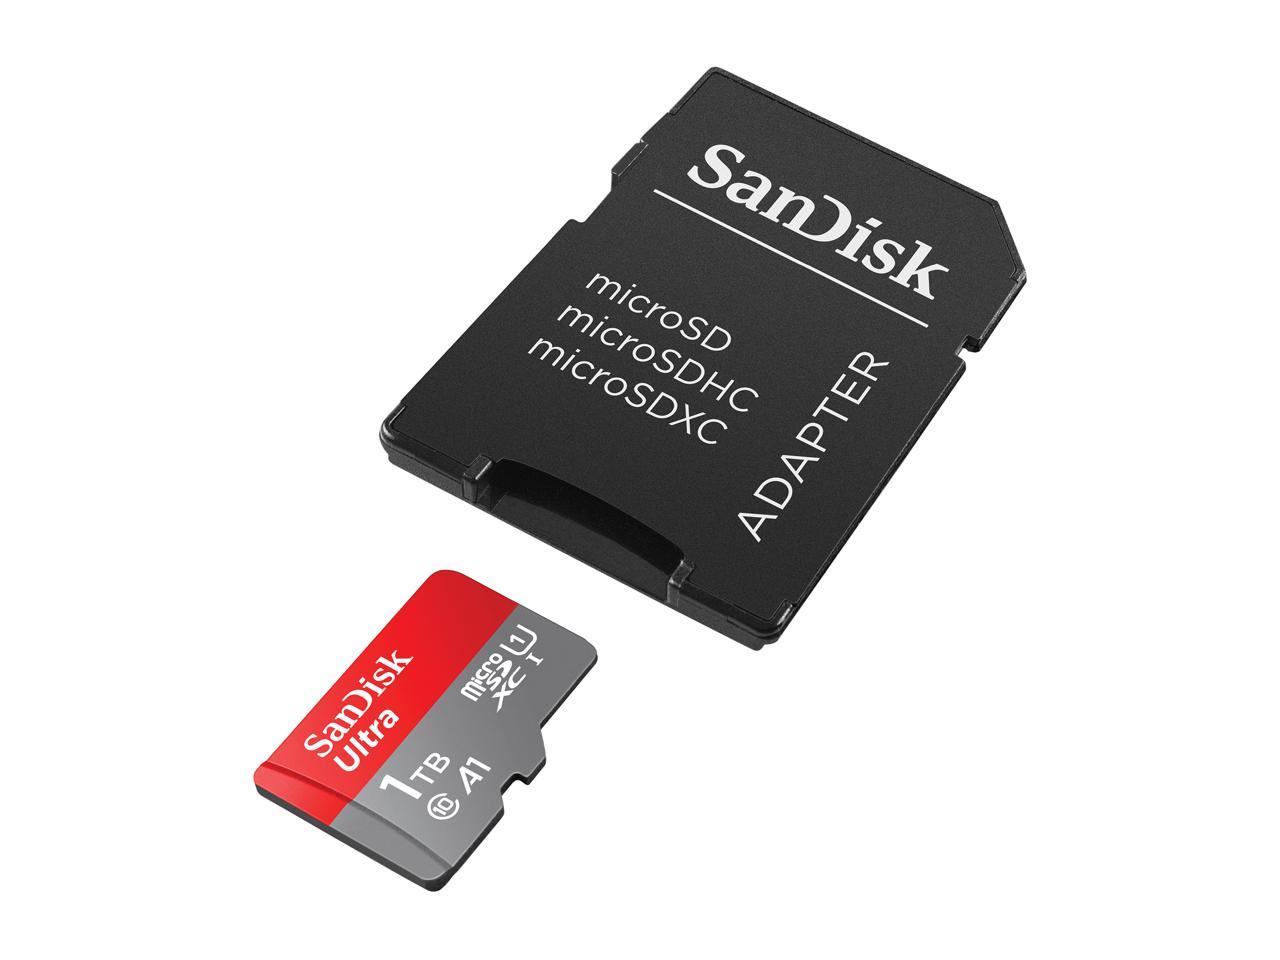 100MBs A1 U1 C10 Works with SanDisk SanDisk Ultra 200GB MicroSDXC Verified for Alcatel 3041G by SanFlash